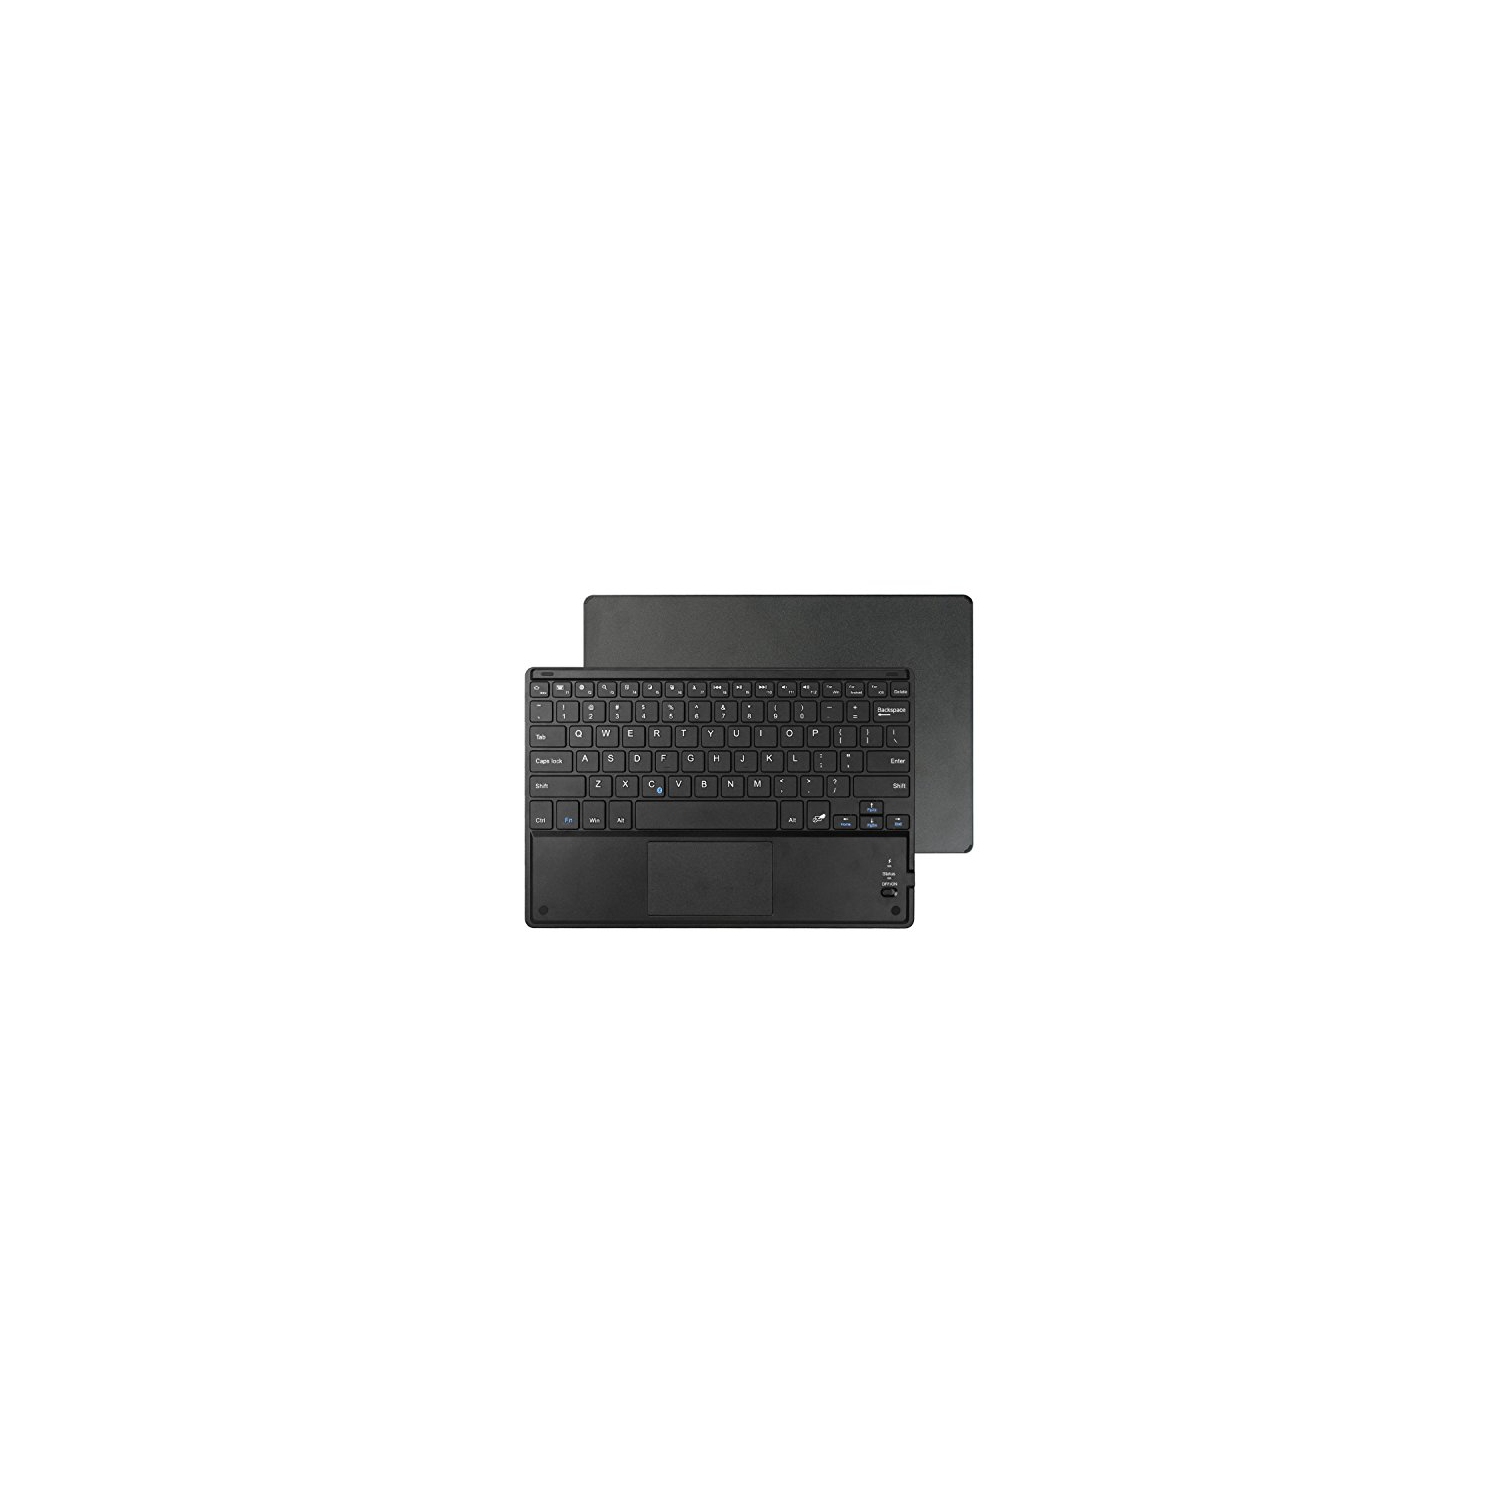 Fintie Ultrathin 4mm Wireless Bluetooth Keyboard with Built-in Multi-Touch Touchpad for iPad, iPhone, Samsung Galaxy, Nexus...